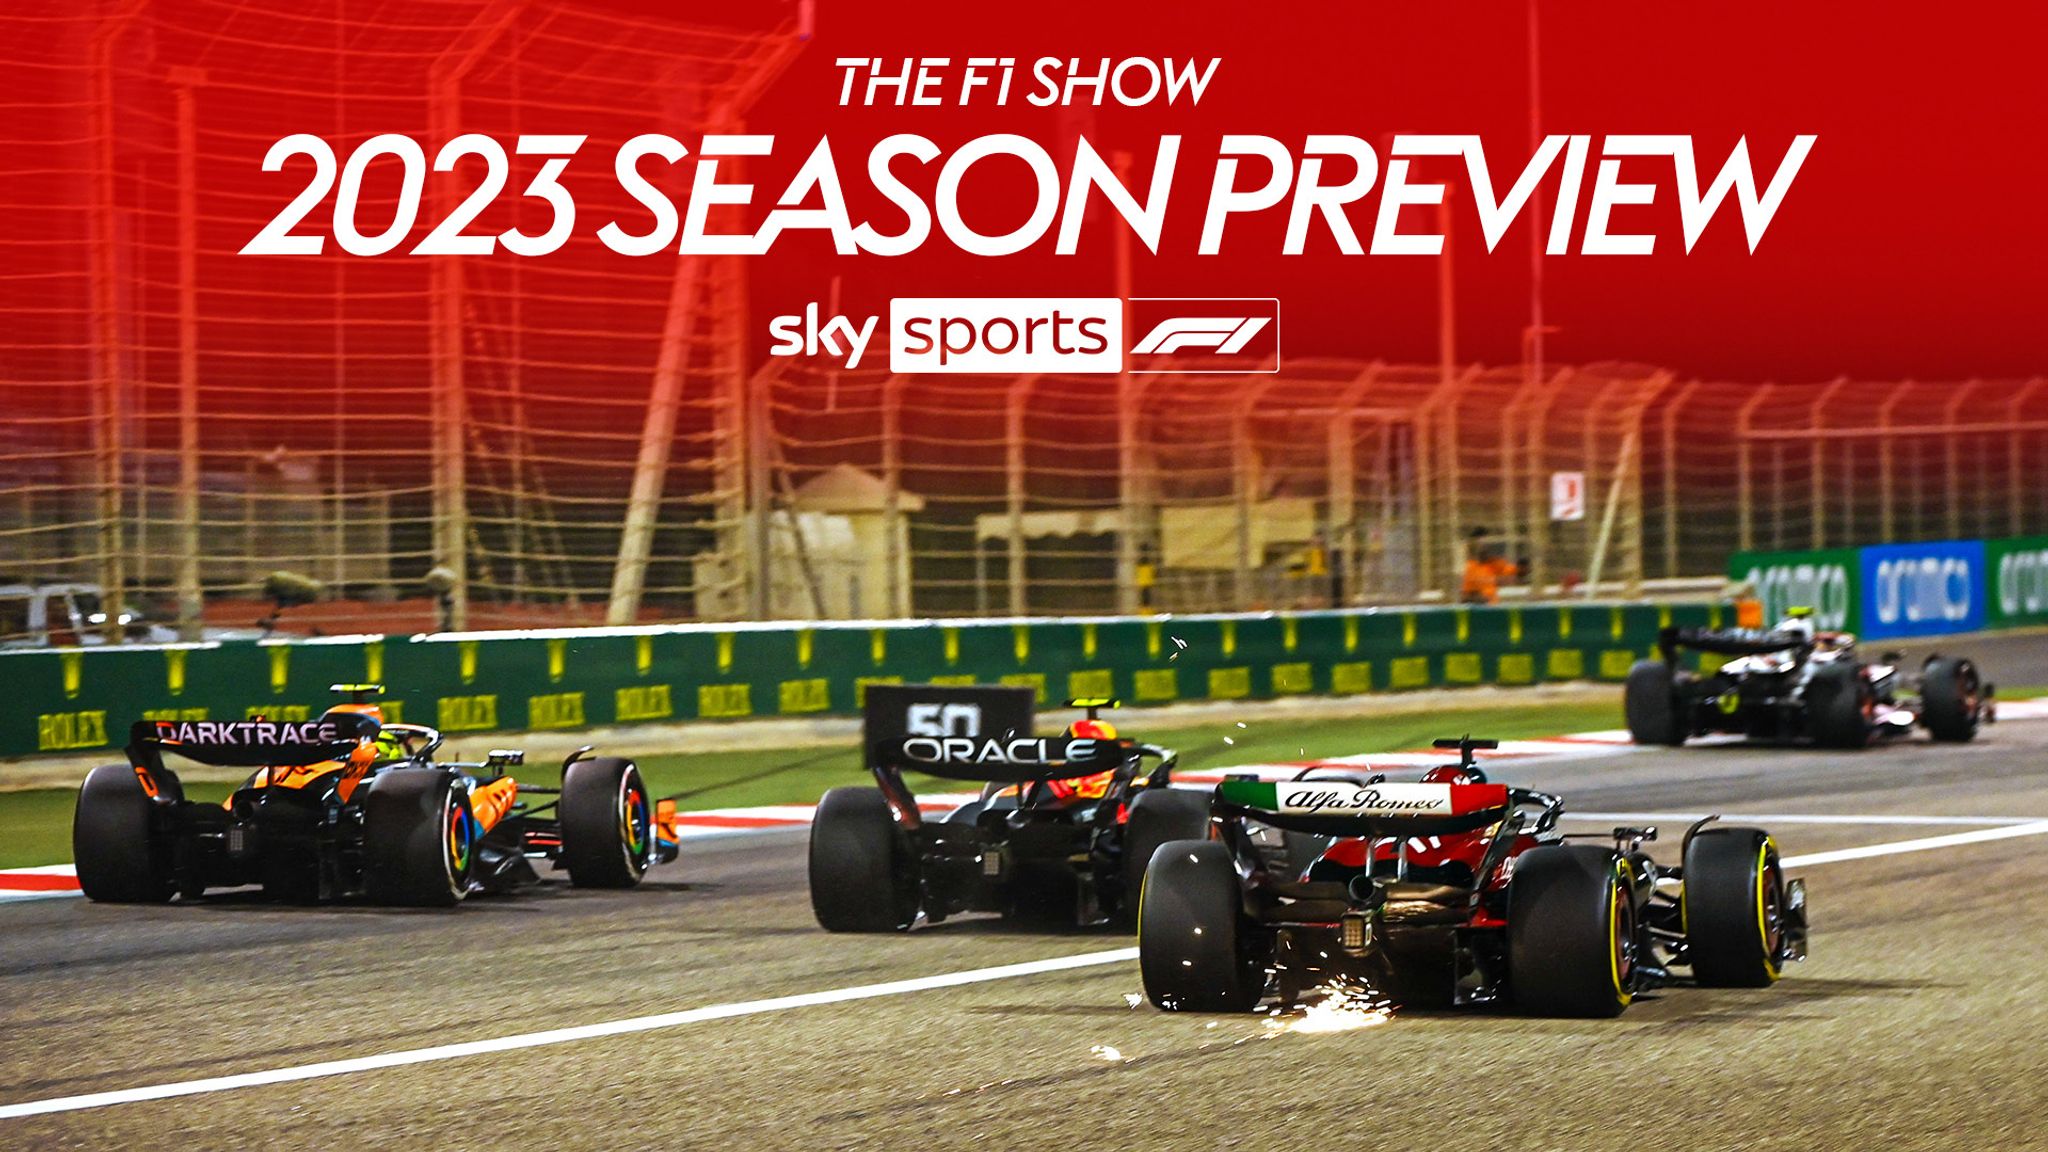 WATCH 2023 Season preview The F1 Show F1 News Sky Sports